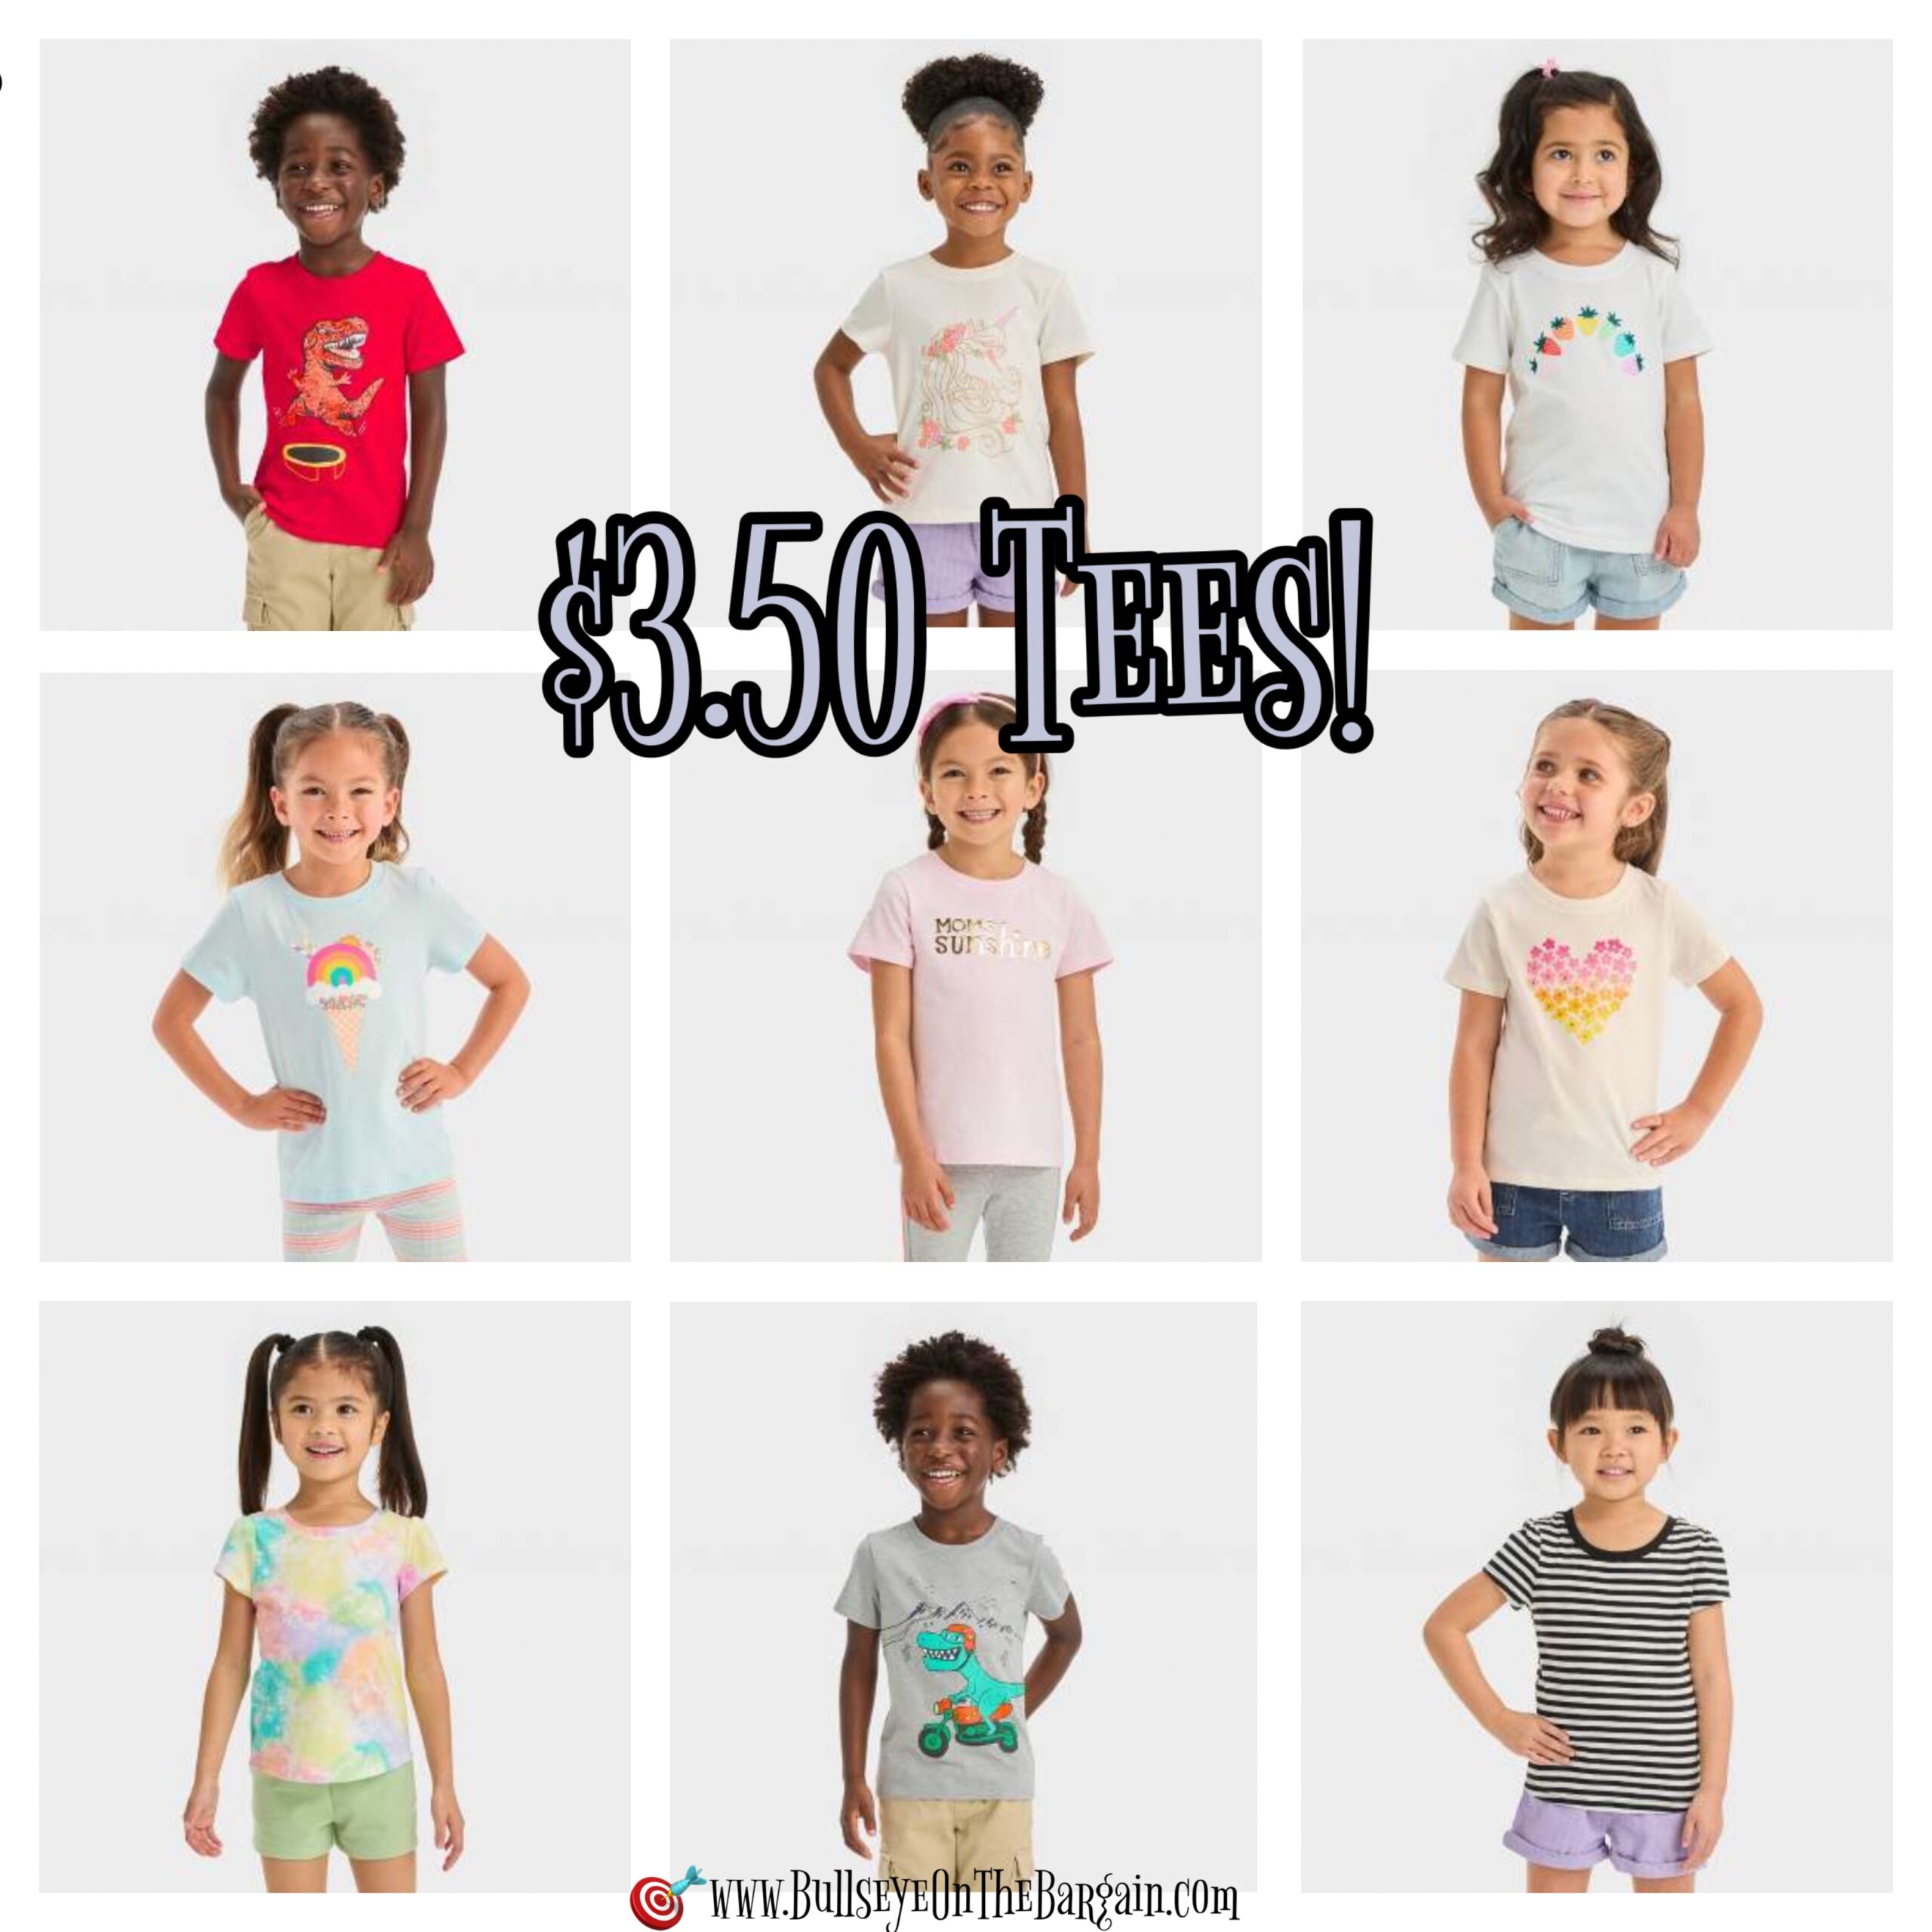 STOCK UP TIME!!!! $3.50 TEES!